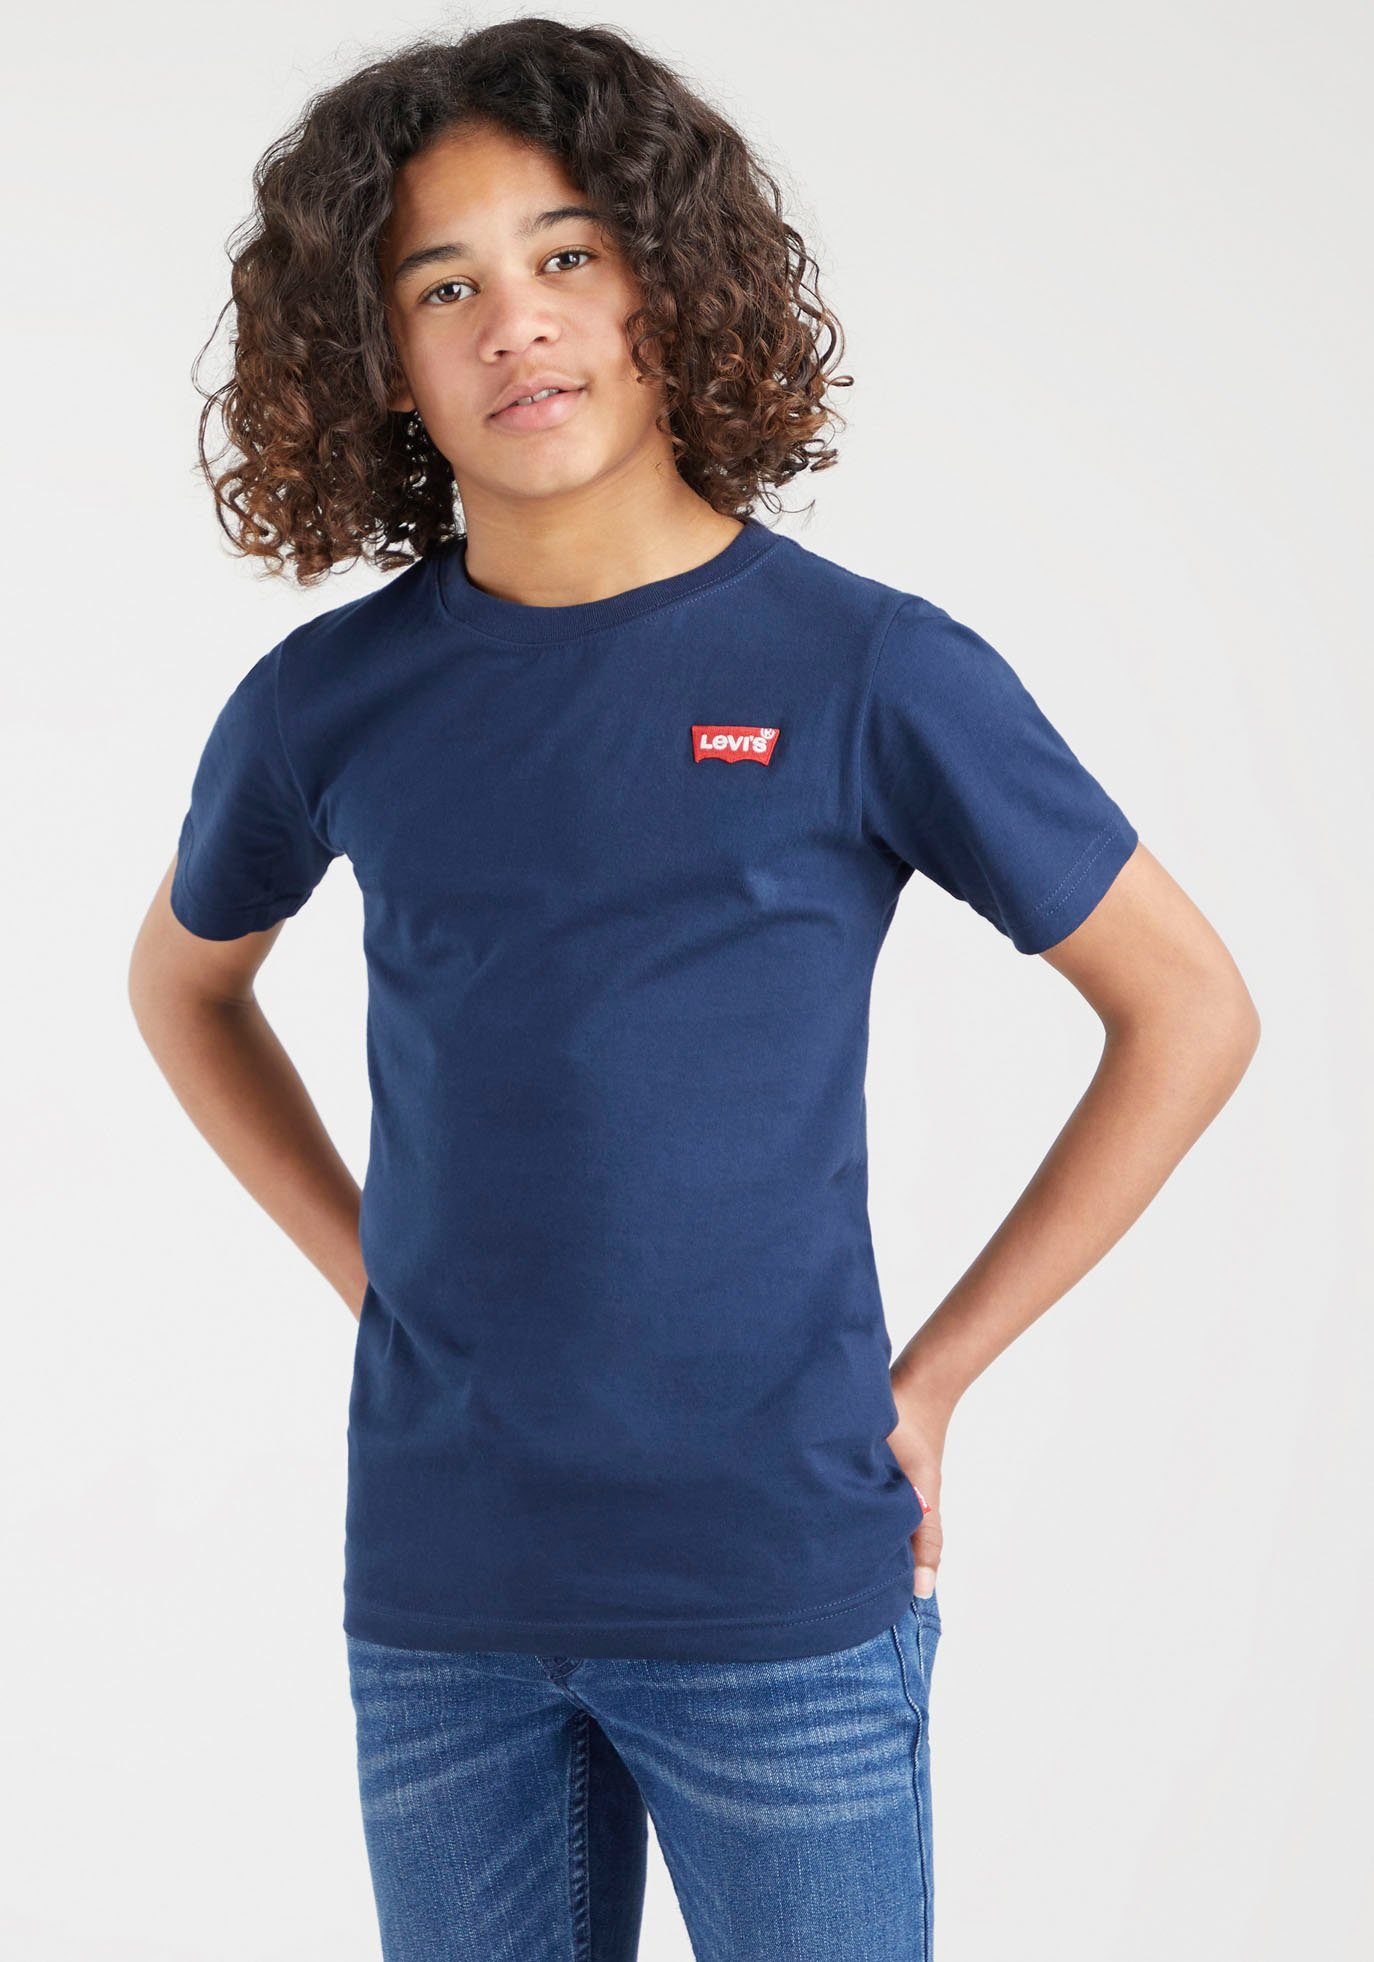 Levi's® Kids T-Shirt BATWING HIT CHEST navy BOYS for